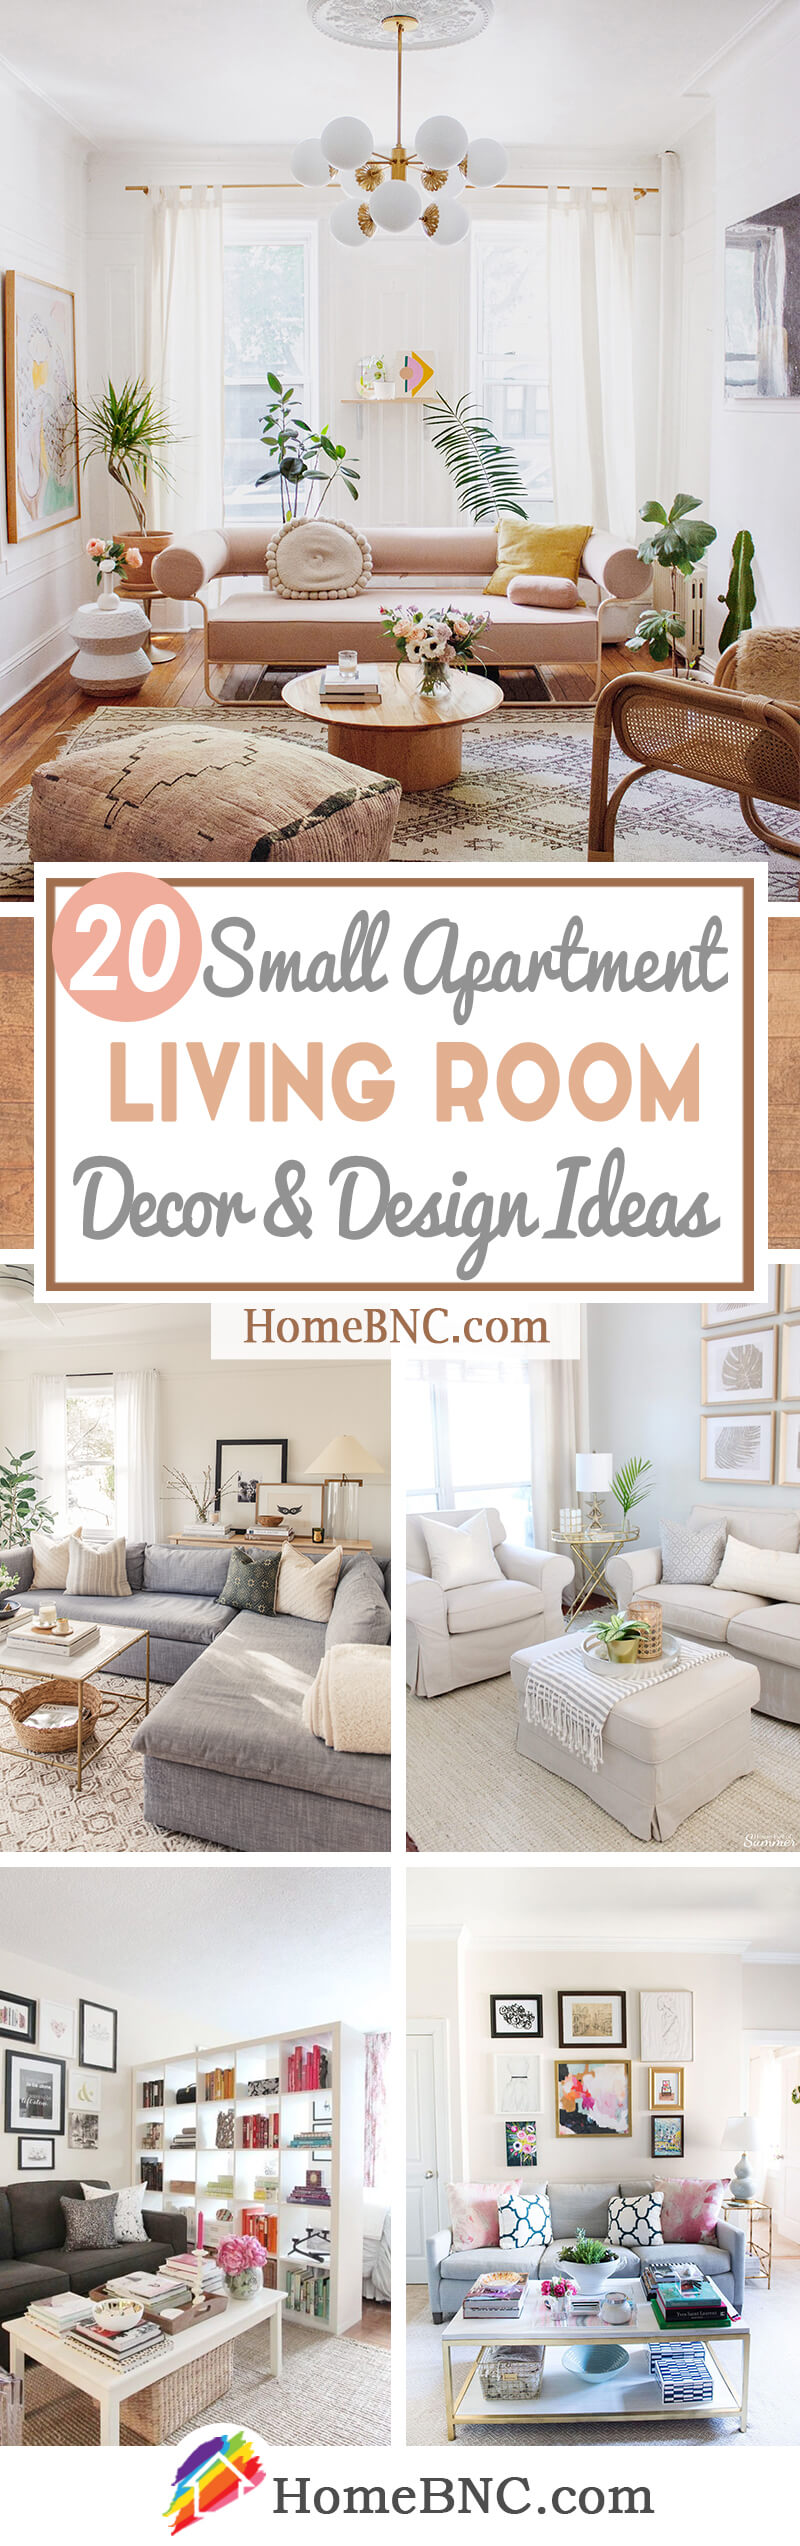 15 Small Apartment Decor and Storage Ideas to Maximize Your Space